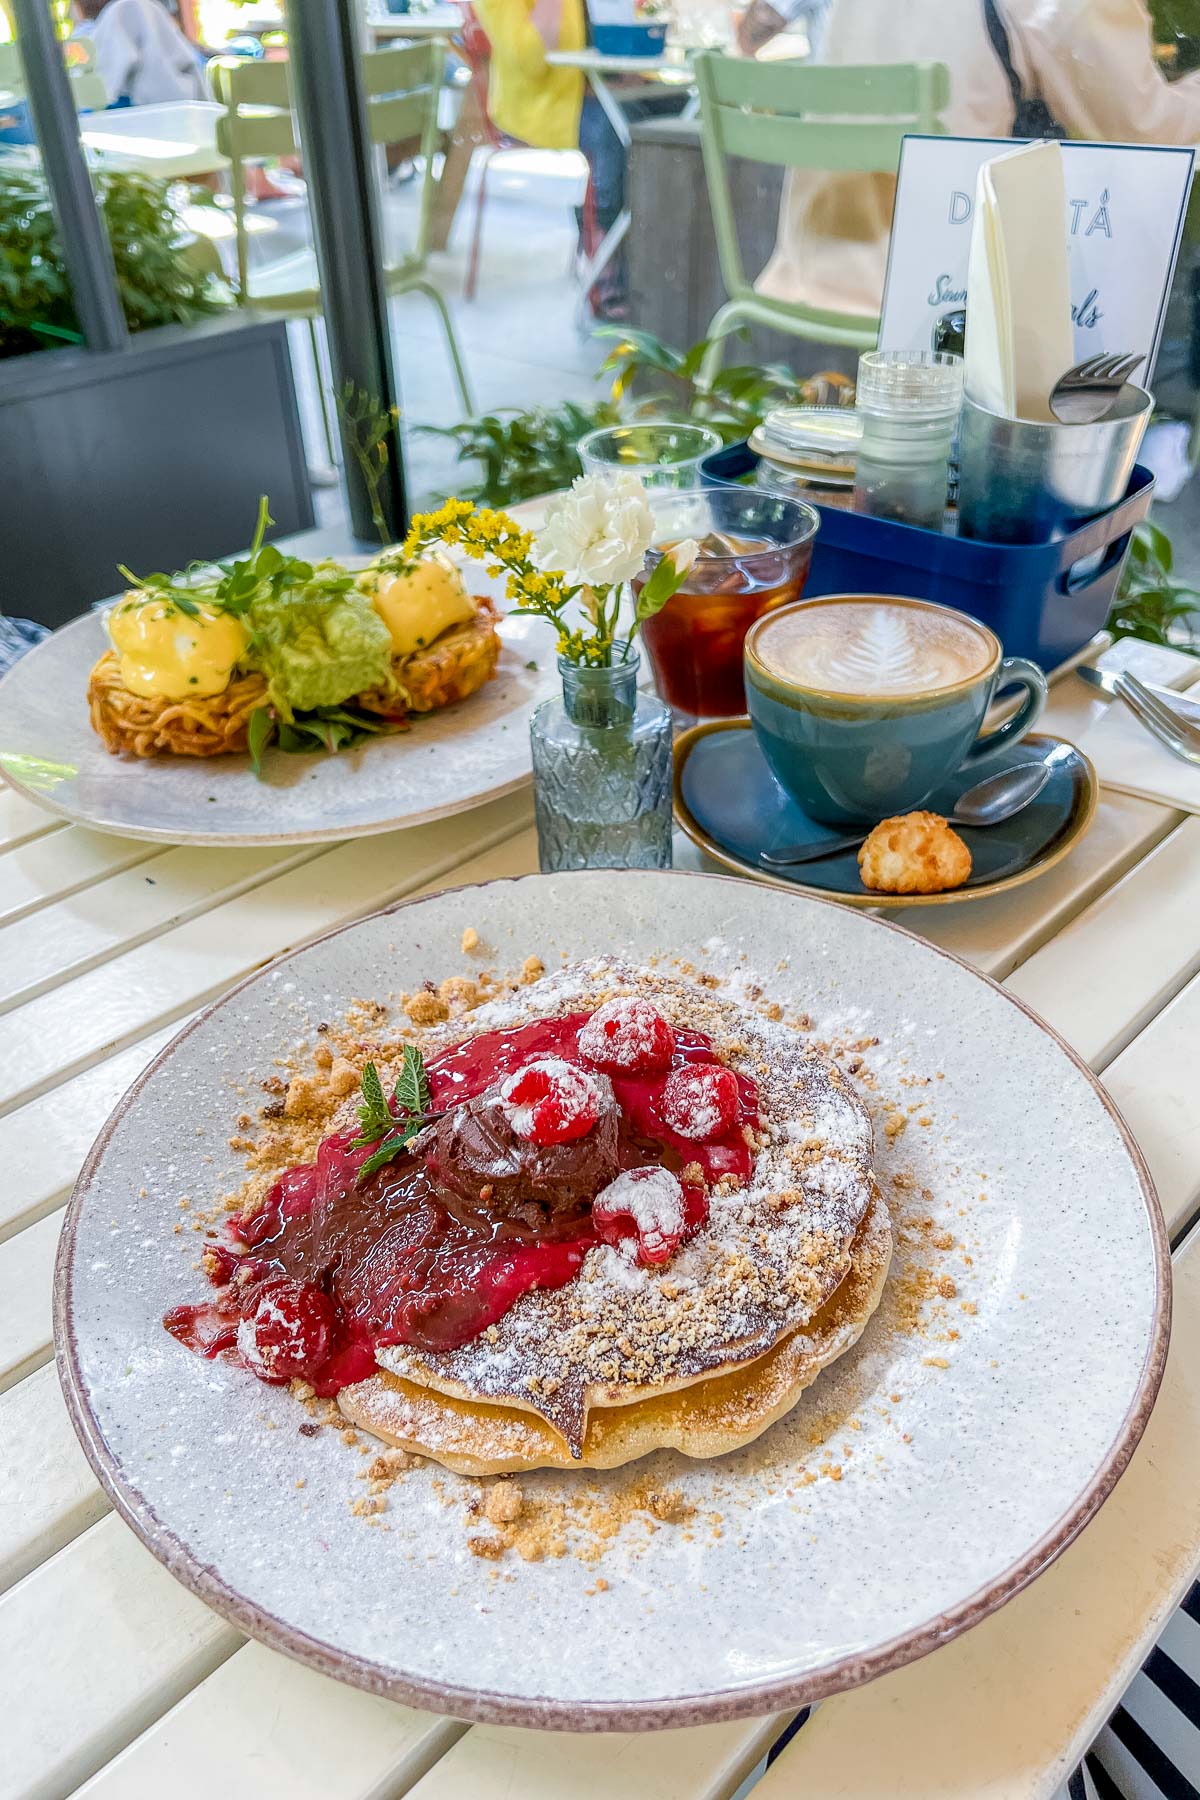 Delicious pancakes at Dignita Hoftuin, one of the best breakfast places in Amsterdam